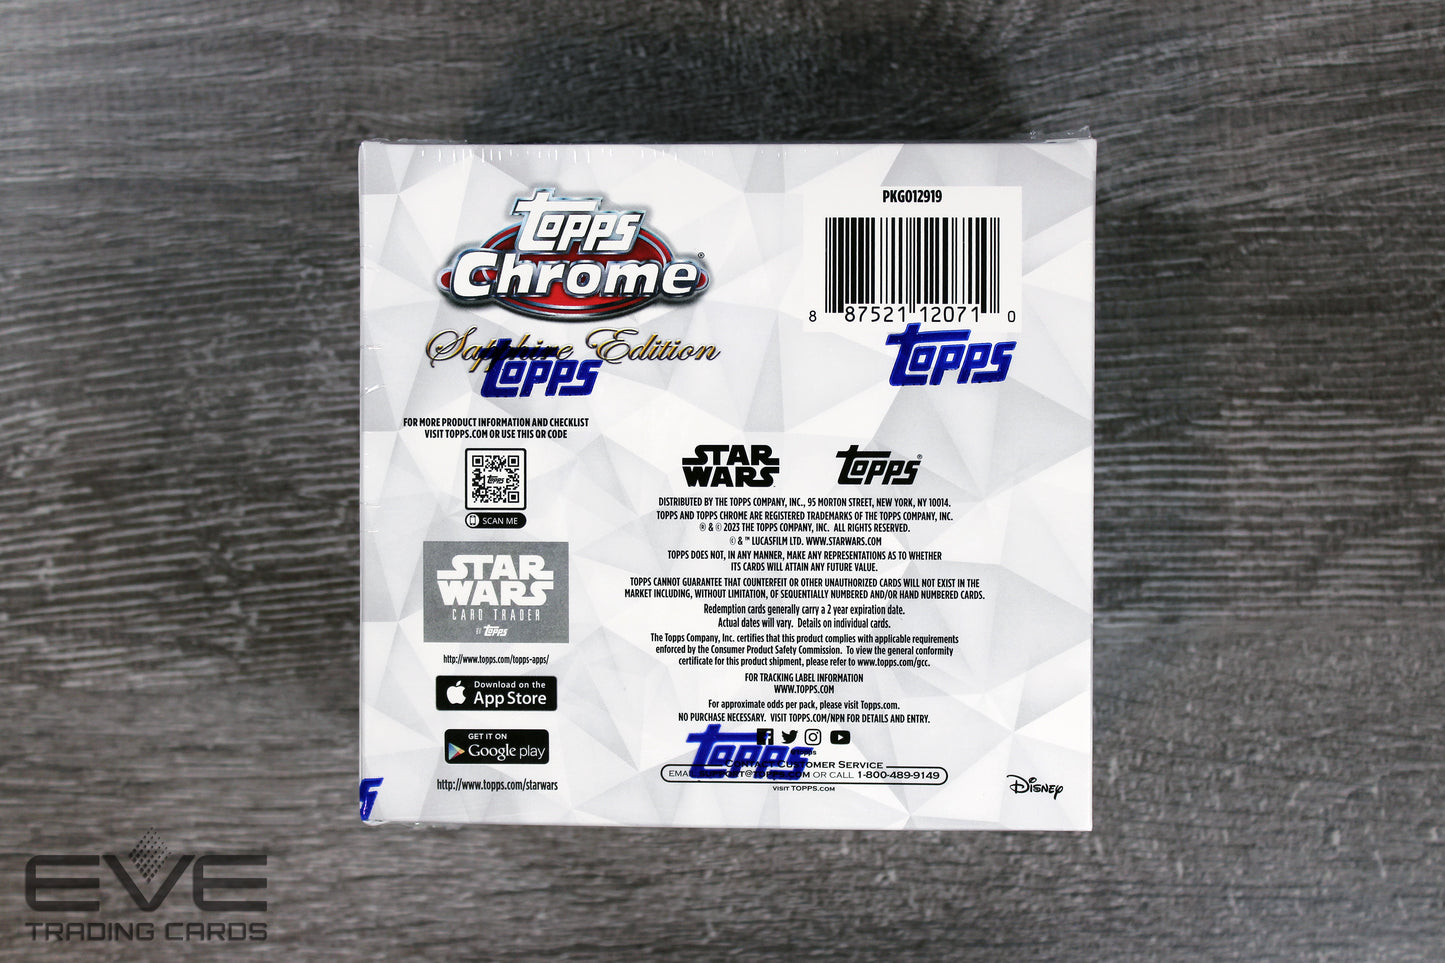 2023 Topps Star Wars Chrome Sapphire Edition: Return of the Jedi 40th Anniversary Trading Cards Box